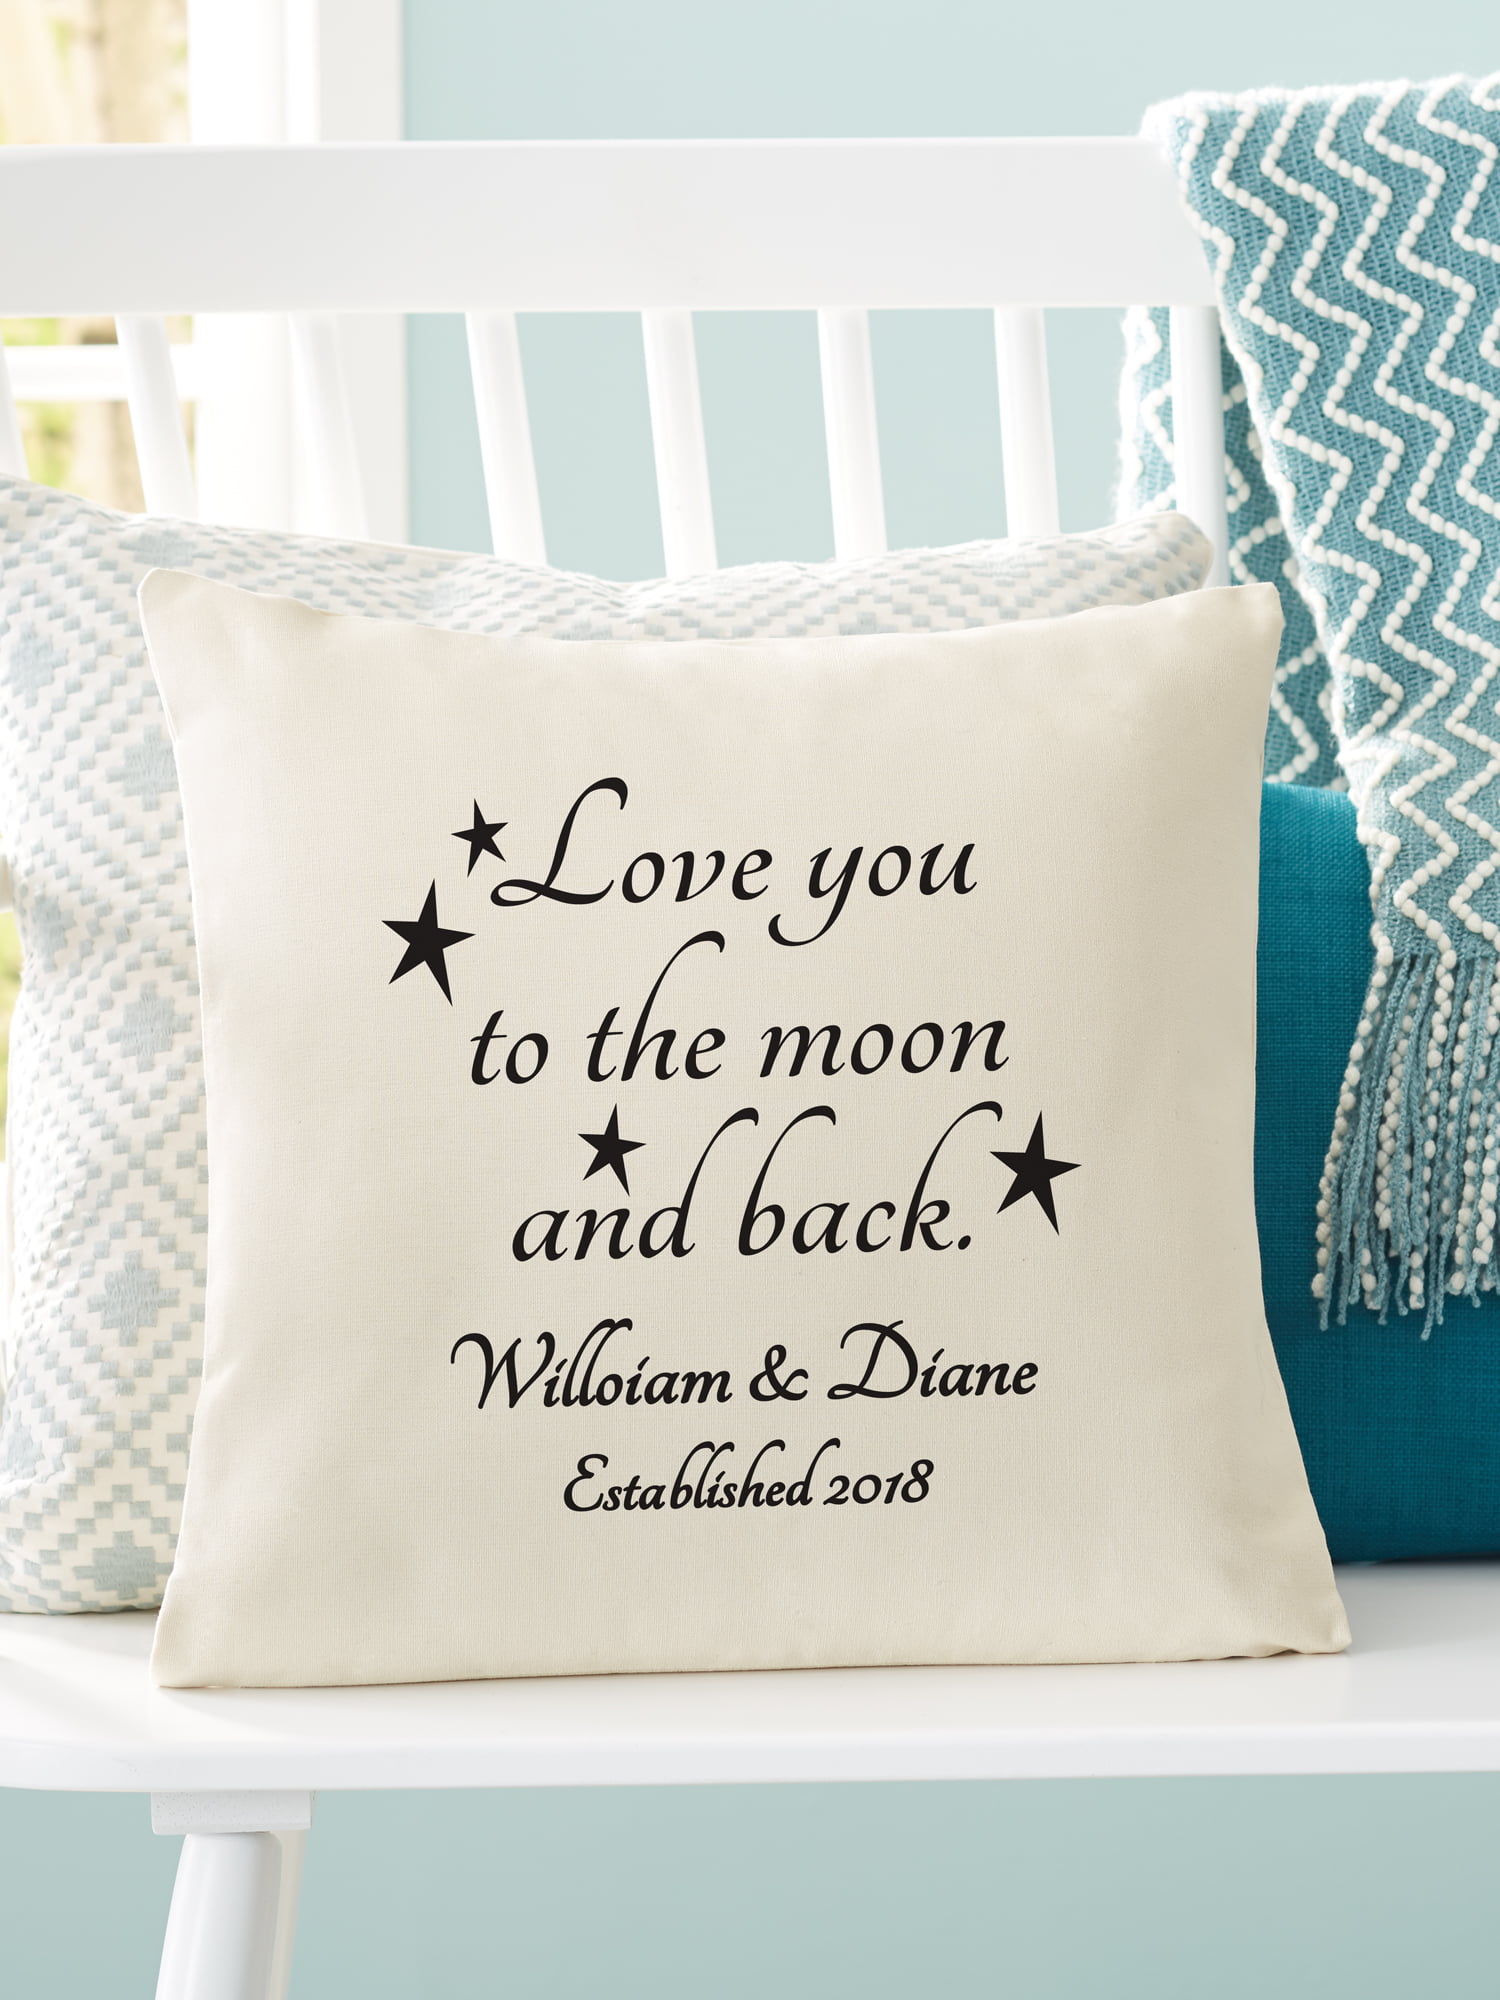 WE LOVE YOU MOON BACK PERSONALISED CUSTOM PILLOW CUSHION PHOTO GIFT PRESENT